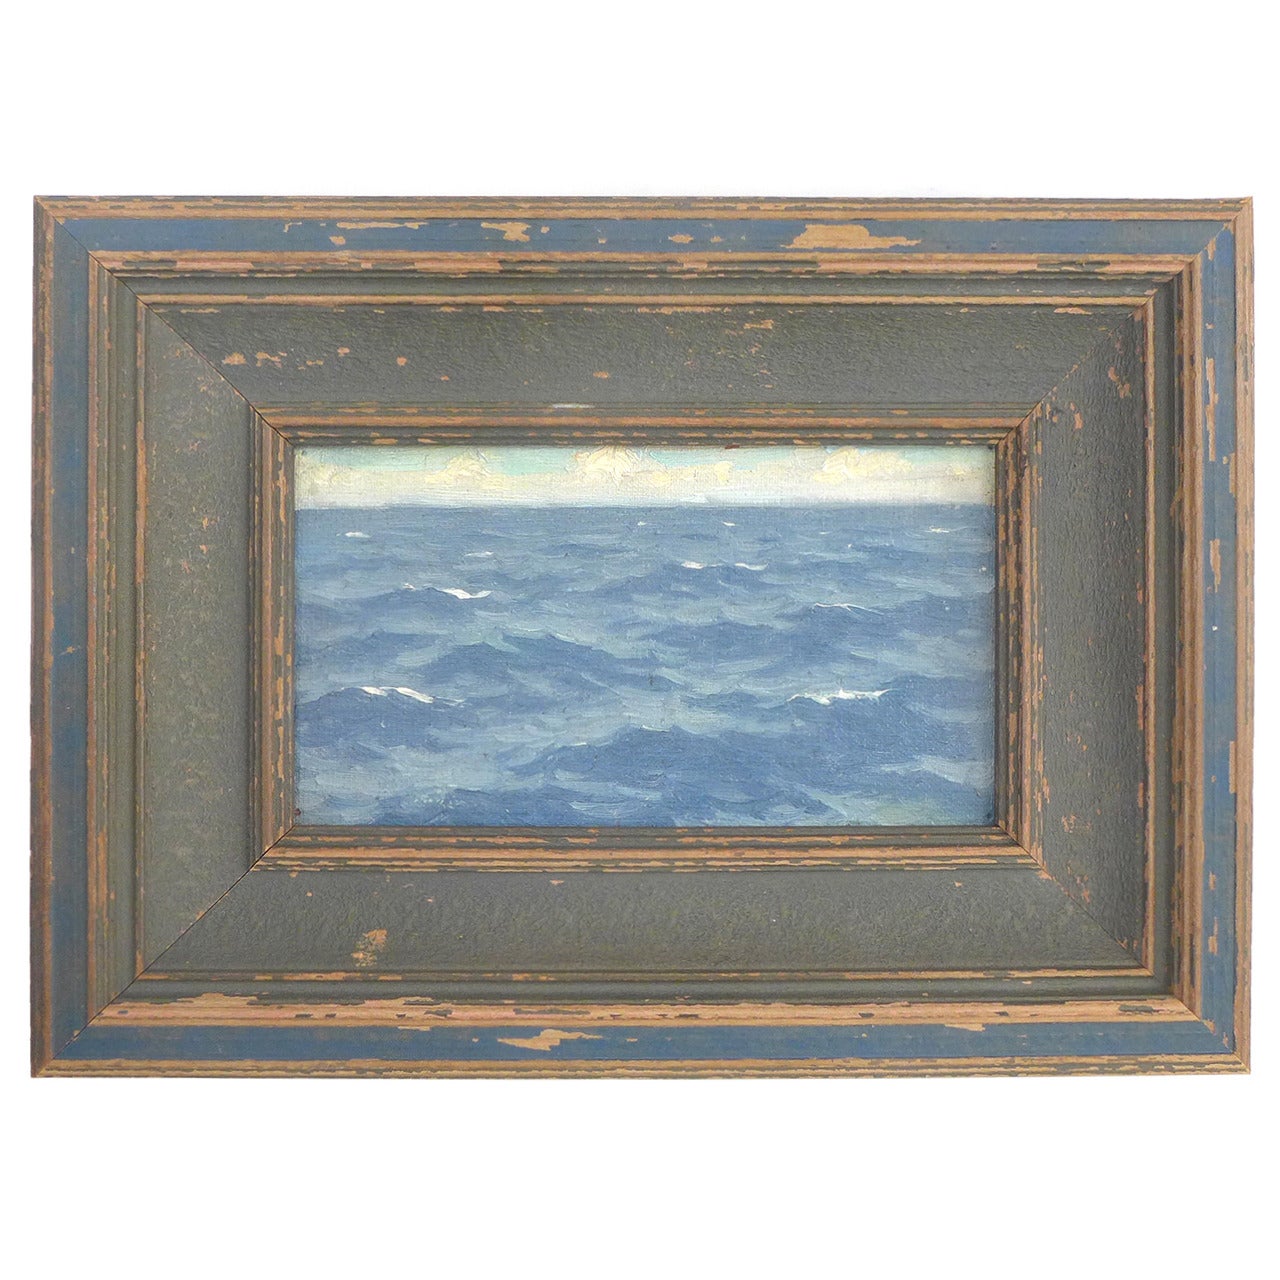 Painting of the Sea by J Mason Reeves